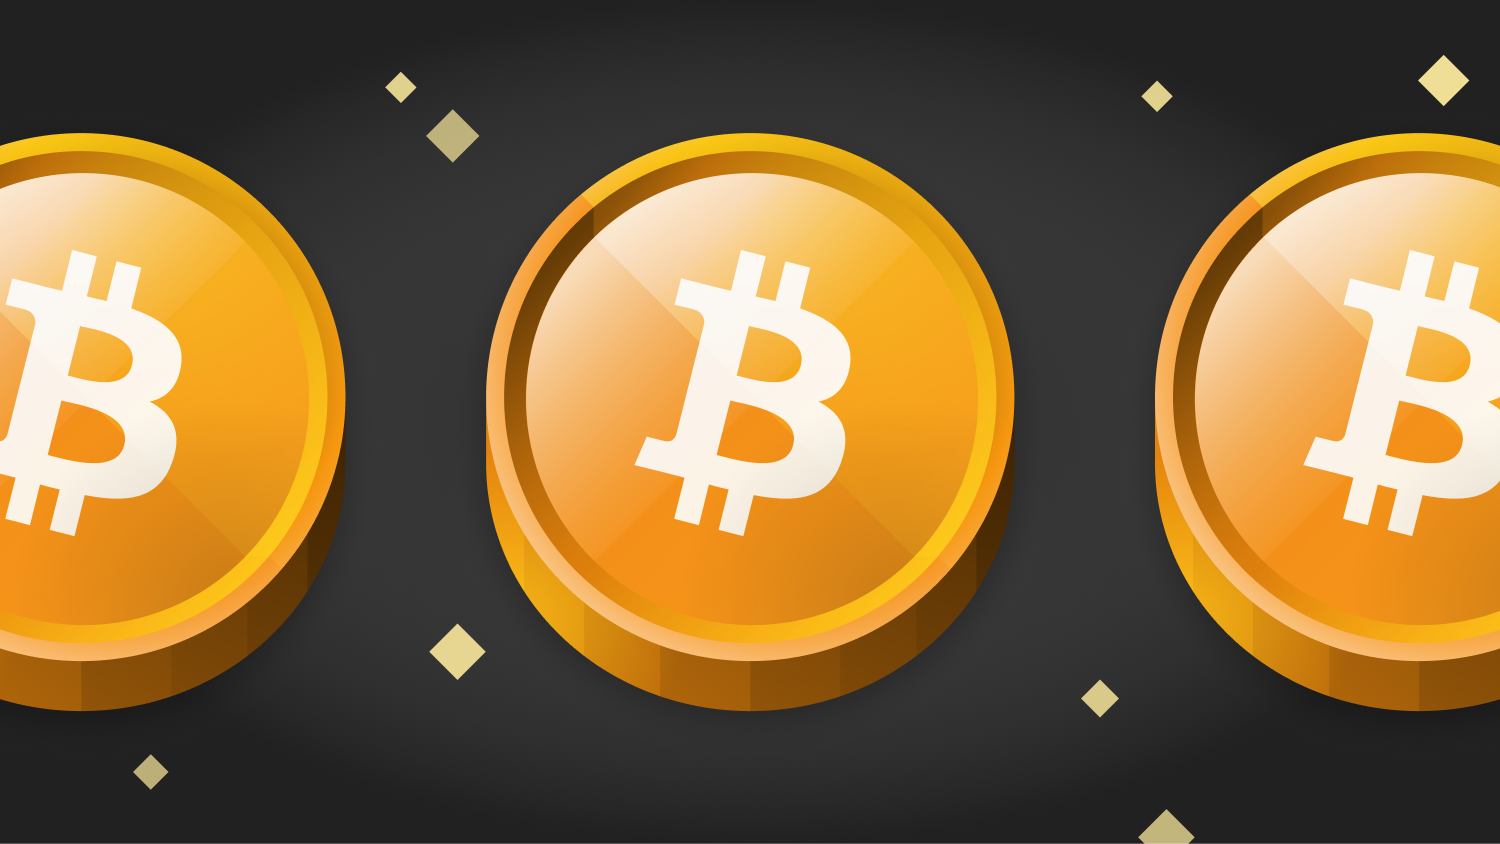 What Is Bitcoin? | The Complete Guide for Beginners